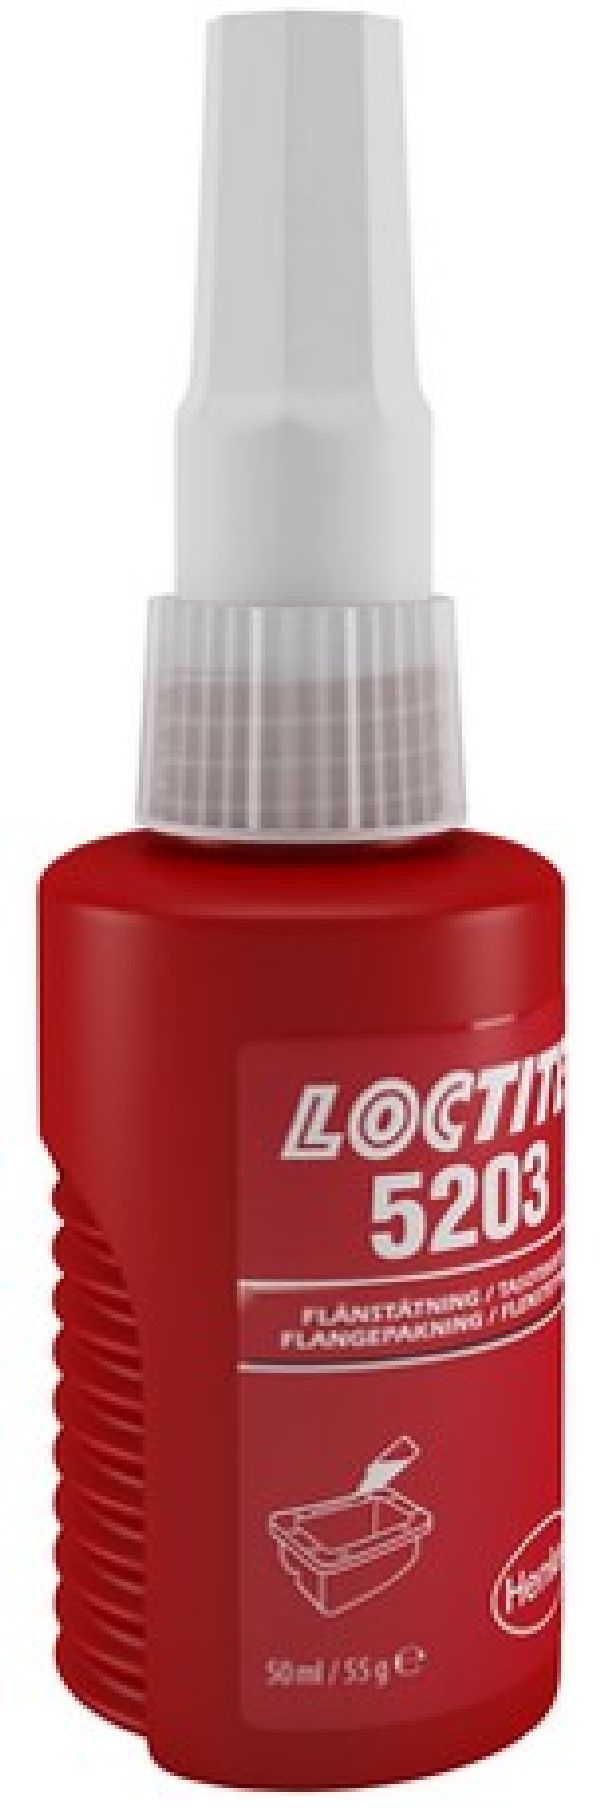 Loctite 5203 Bouteille  50 ml (EMB 10)